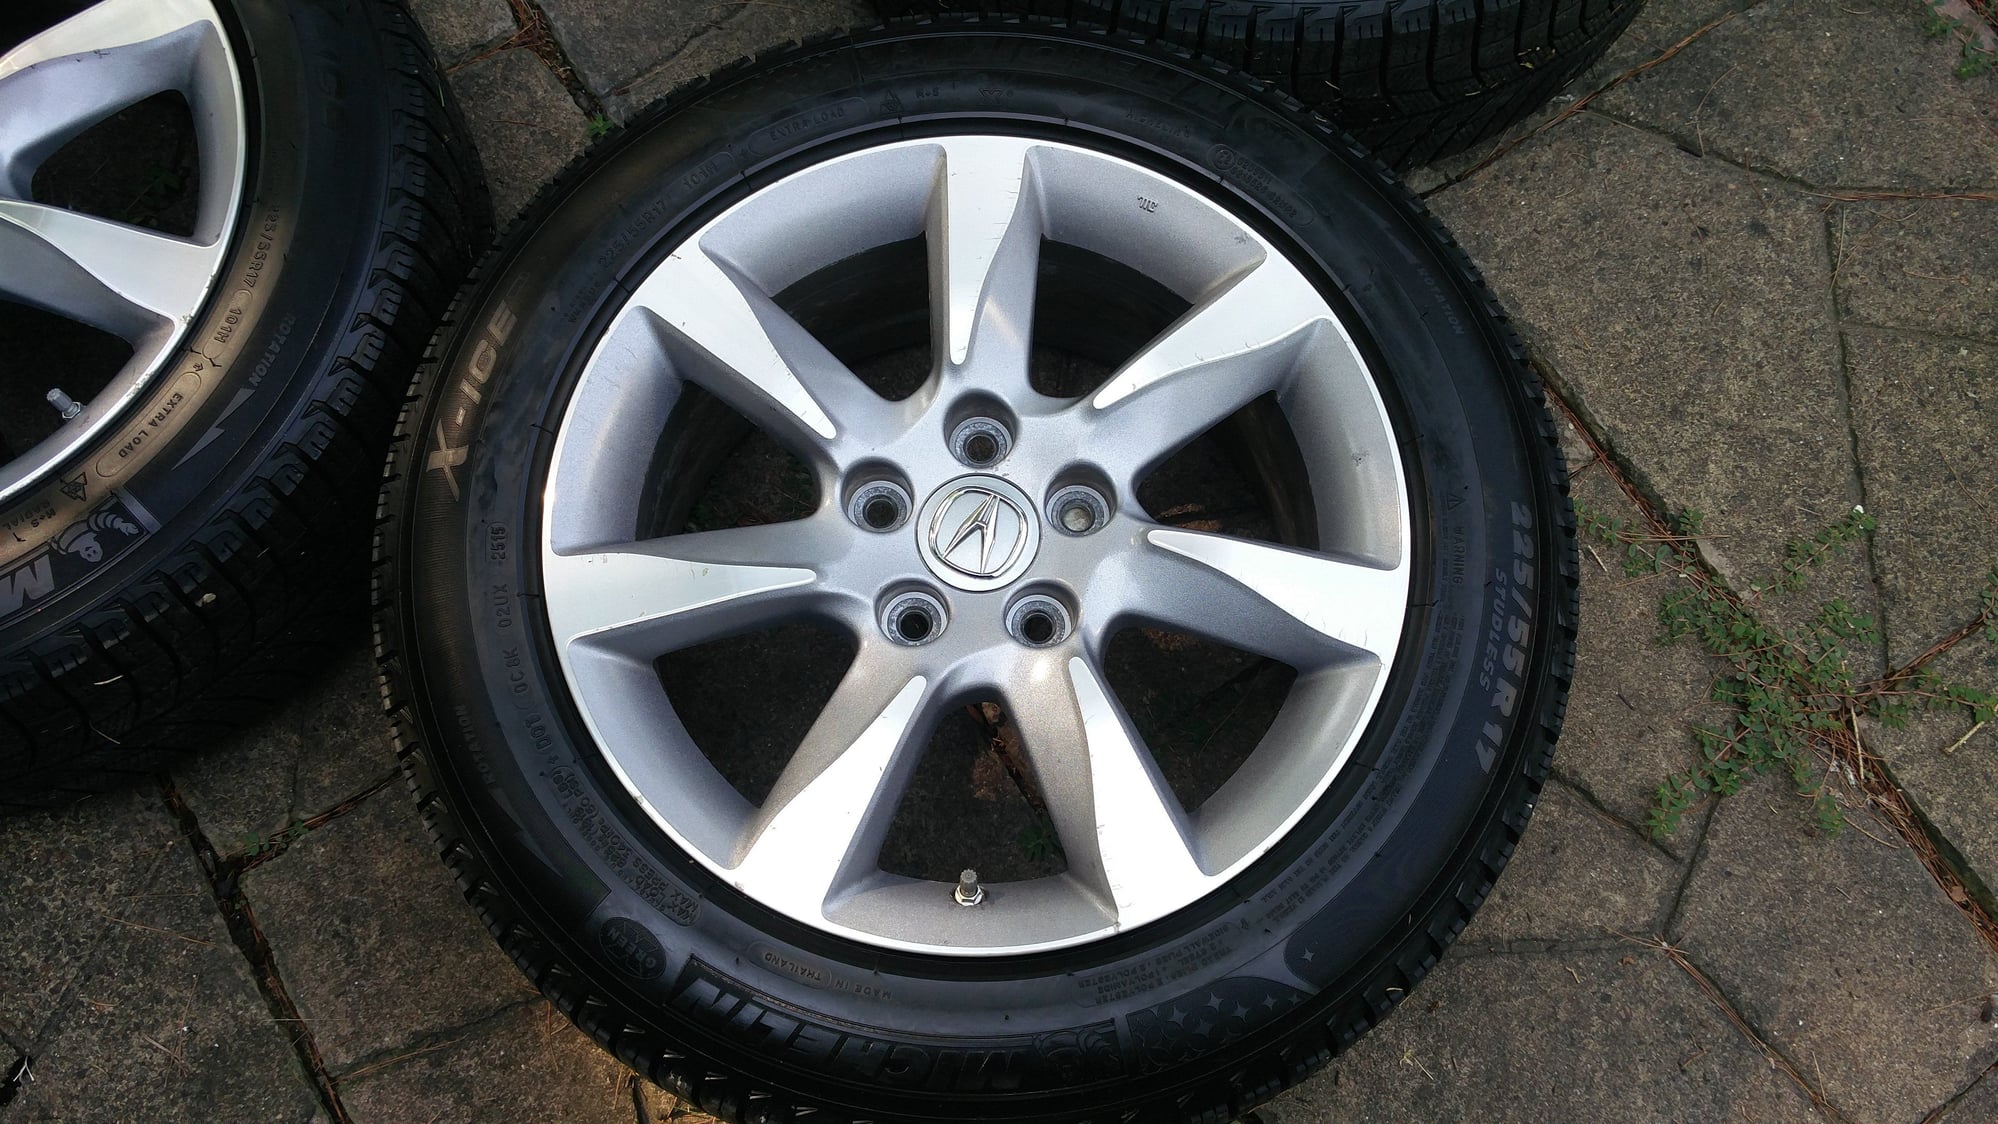 Wheels and Tires/Axles - FS: Acura TL/Honda OEM 17x8 Wheels TPMS&225/55/17 Michelin X-IceXI3Winter tires 5X120 - Used - Indianapolis, IN 46220, United States